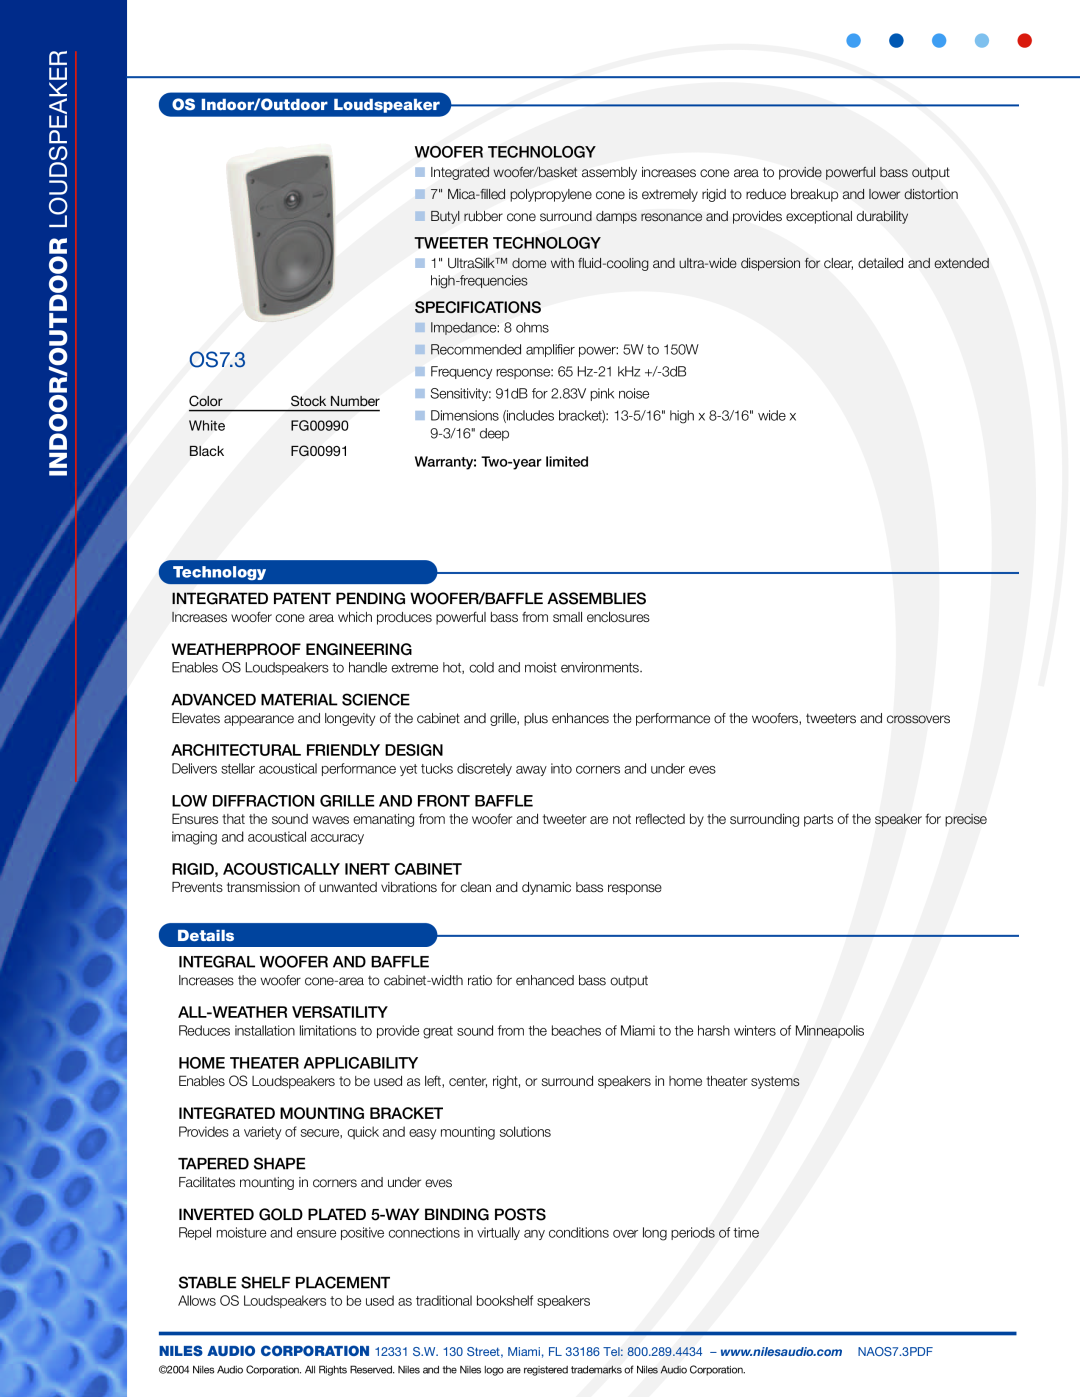 Niles Audio OS7.3 specifications OS Indoor/Outdoor Loudspeaker, Technology, Details 